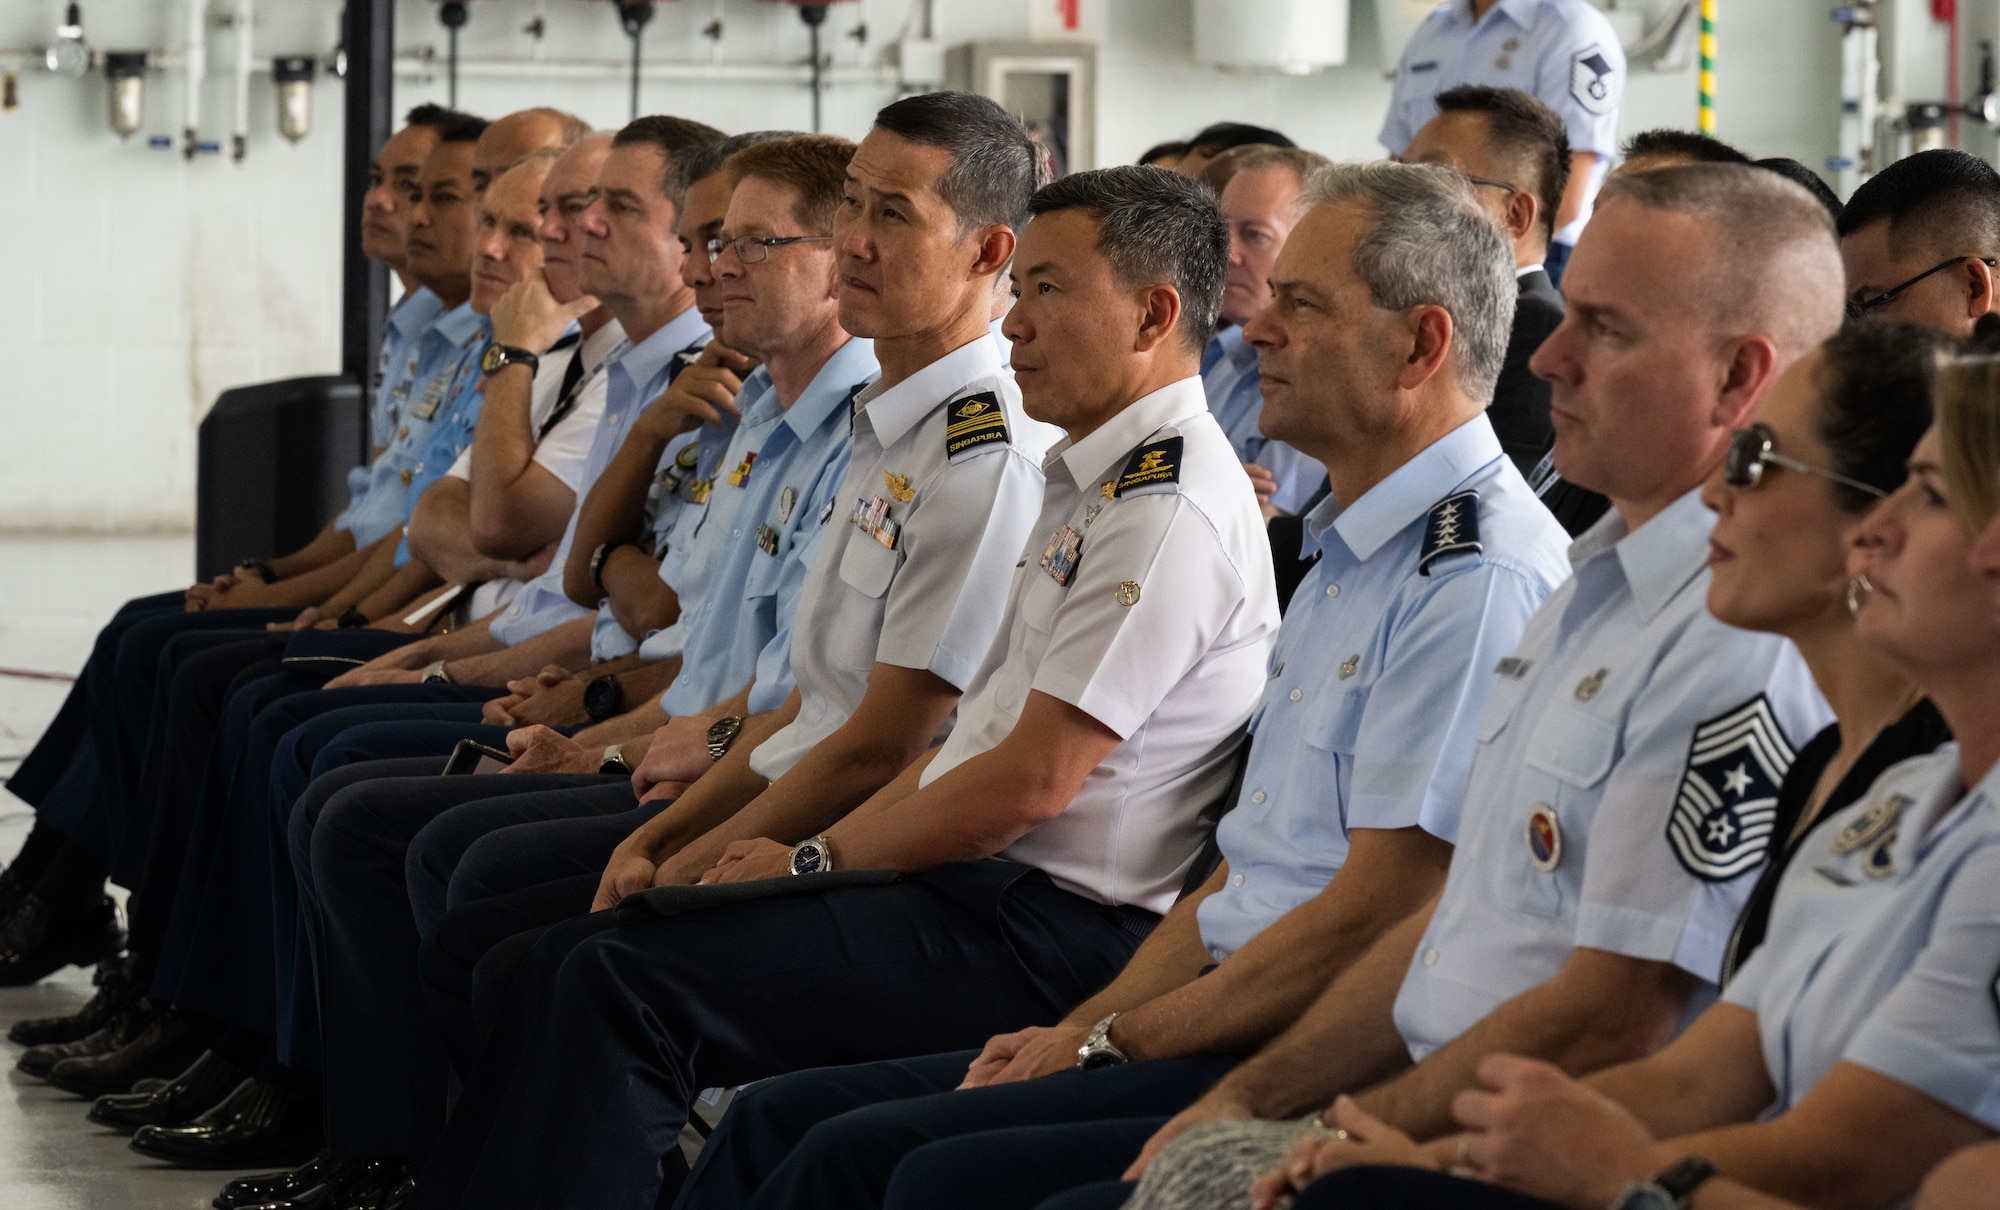 Air chiefs and senior enlisted leaders from nations around the world participate in the graduation ceremony of the inaugural Inter-Pacific Air Forces Academy class, Joint Base Pearl Harbor-Hickam, Hawaii, November 16, 2023. Air forces around the Indo-Pacific currently have varying responsibilities for their nations’ enlisted personnel. IPAFA serves as a comprehensive way to standardize the role of non-commissioned officers and senior enlisted in the region, supporting integrated deterrence and a free and open Indo-Pacific. (U.S. Air Force photo by Tech. Sgt. Hailey Haux)